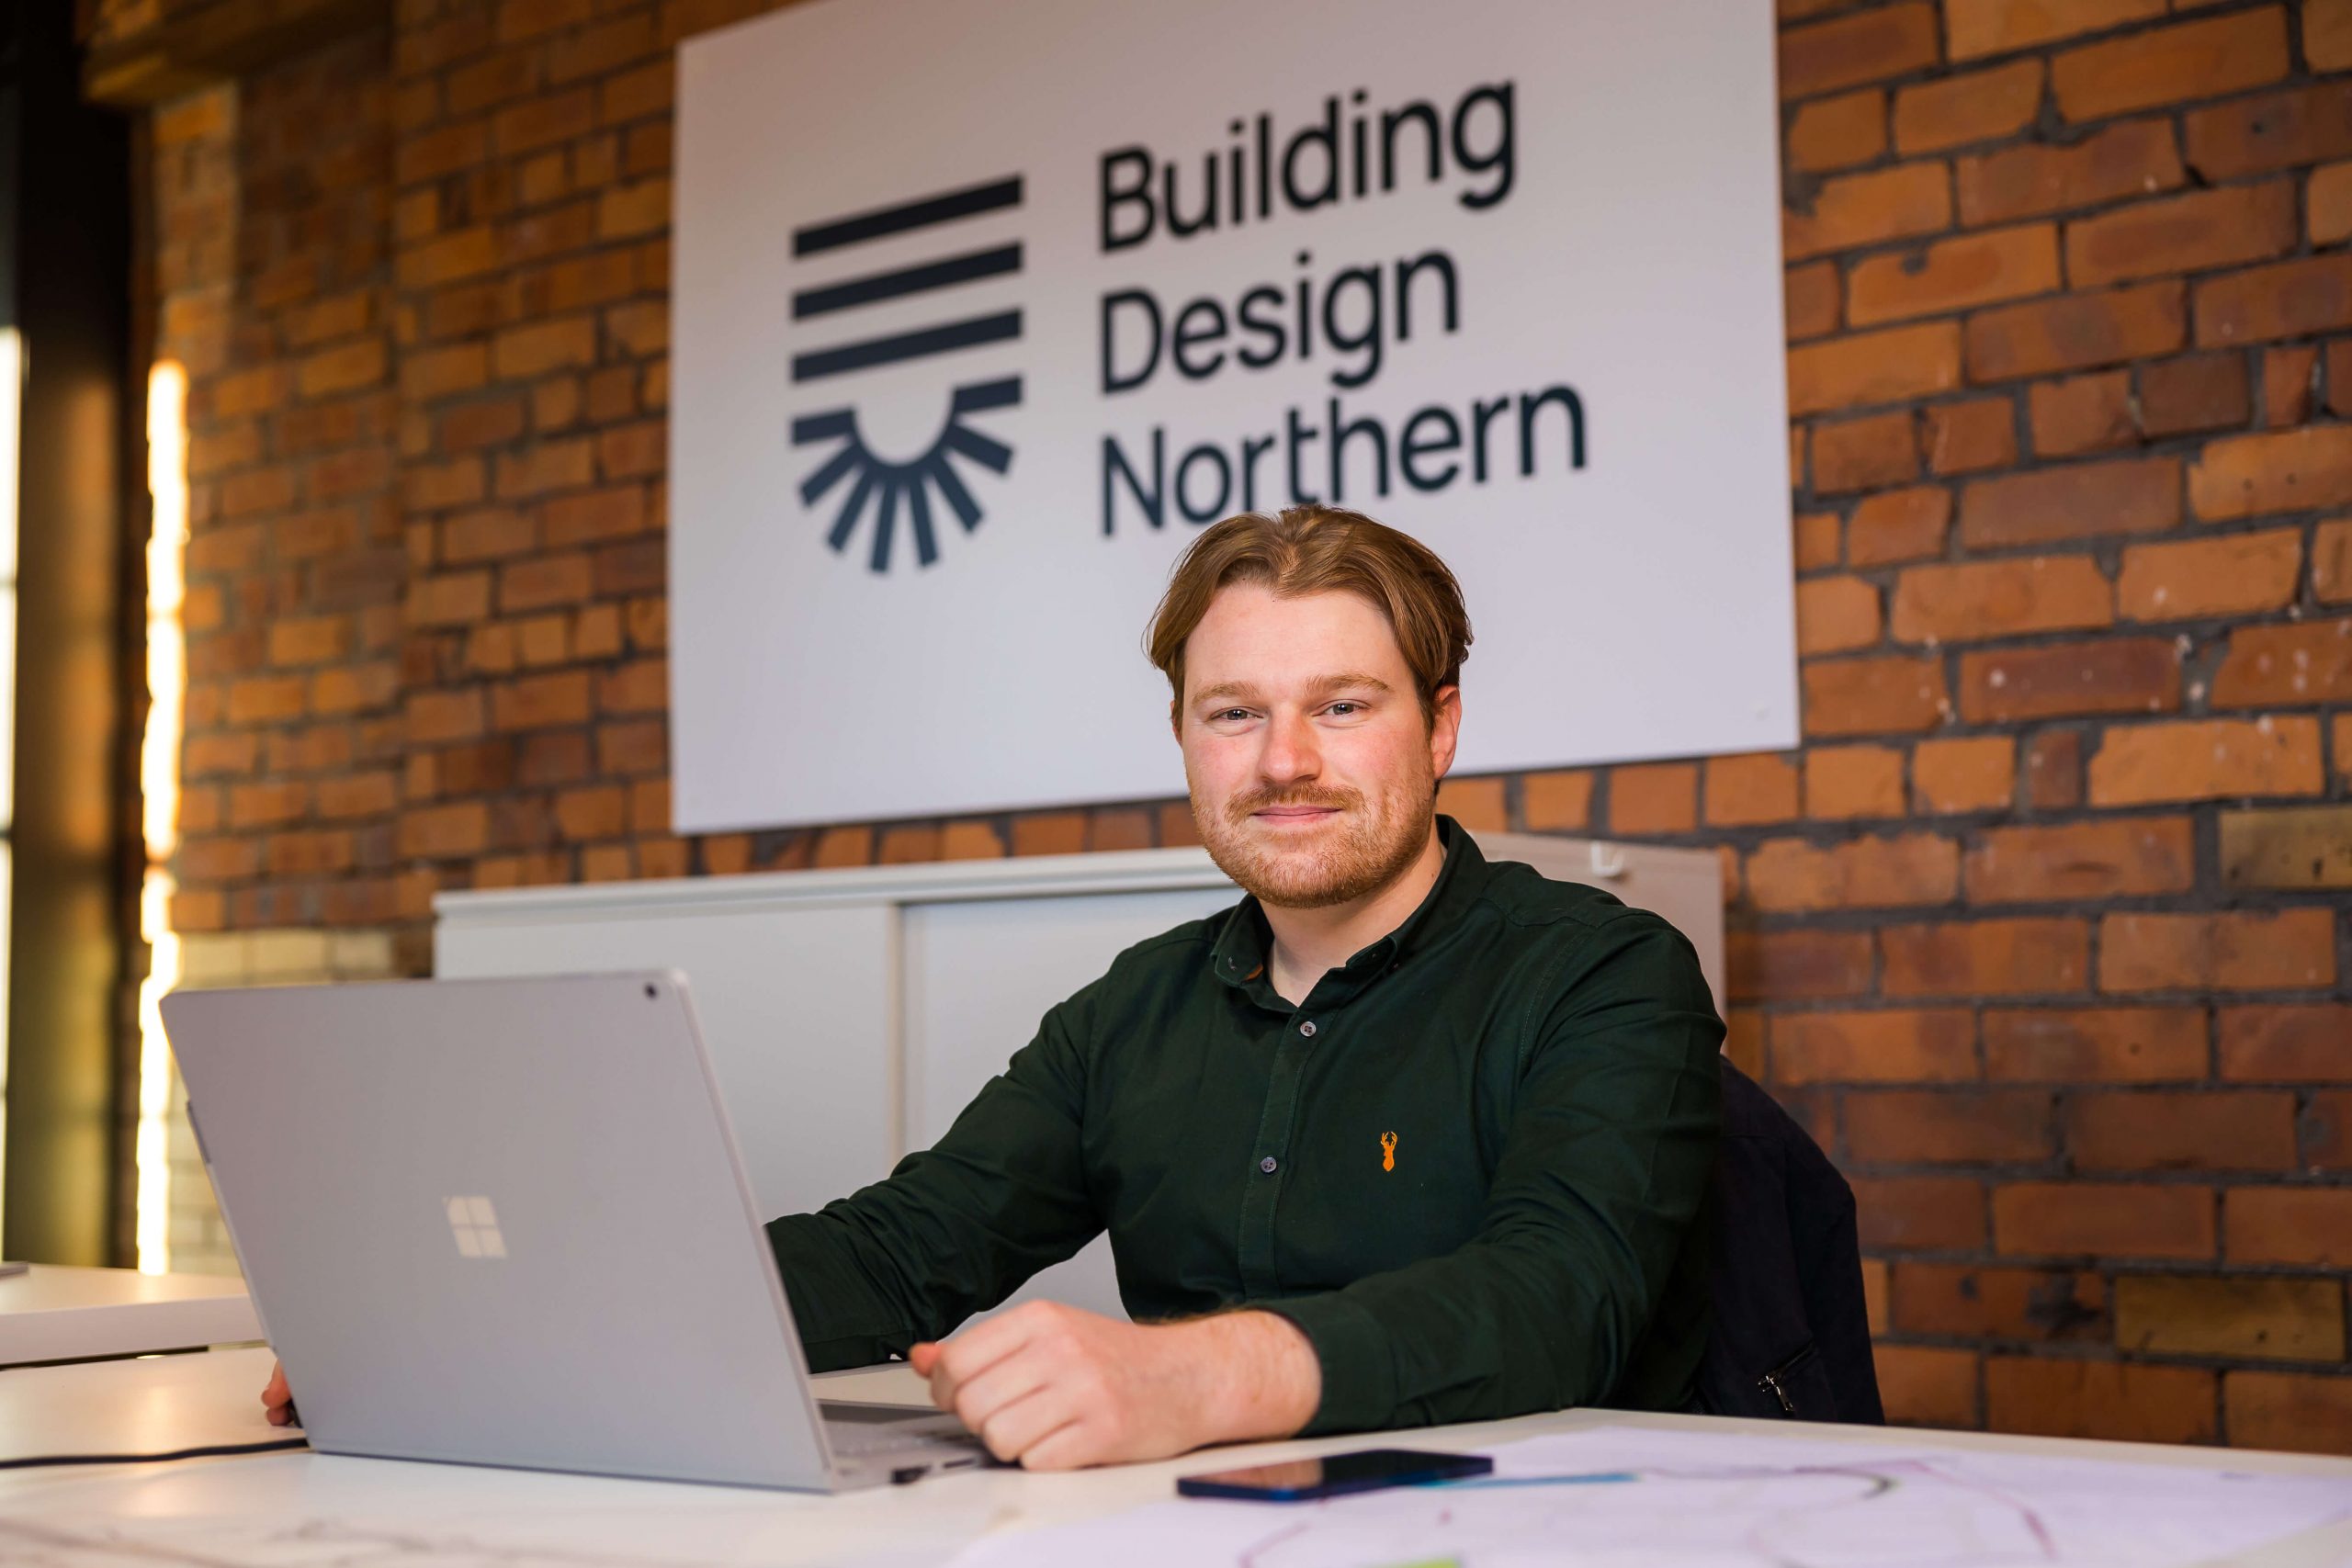 New Hire at Growing Architect Firm